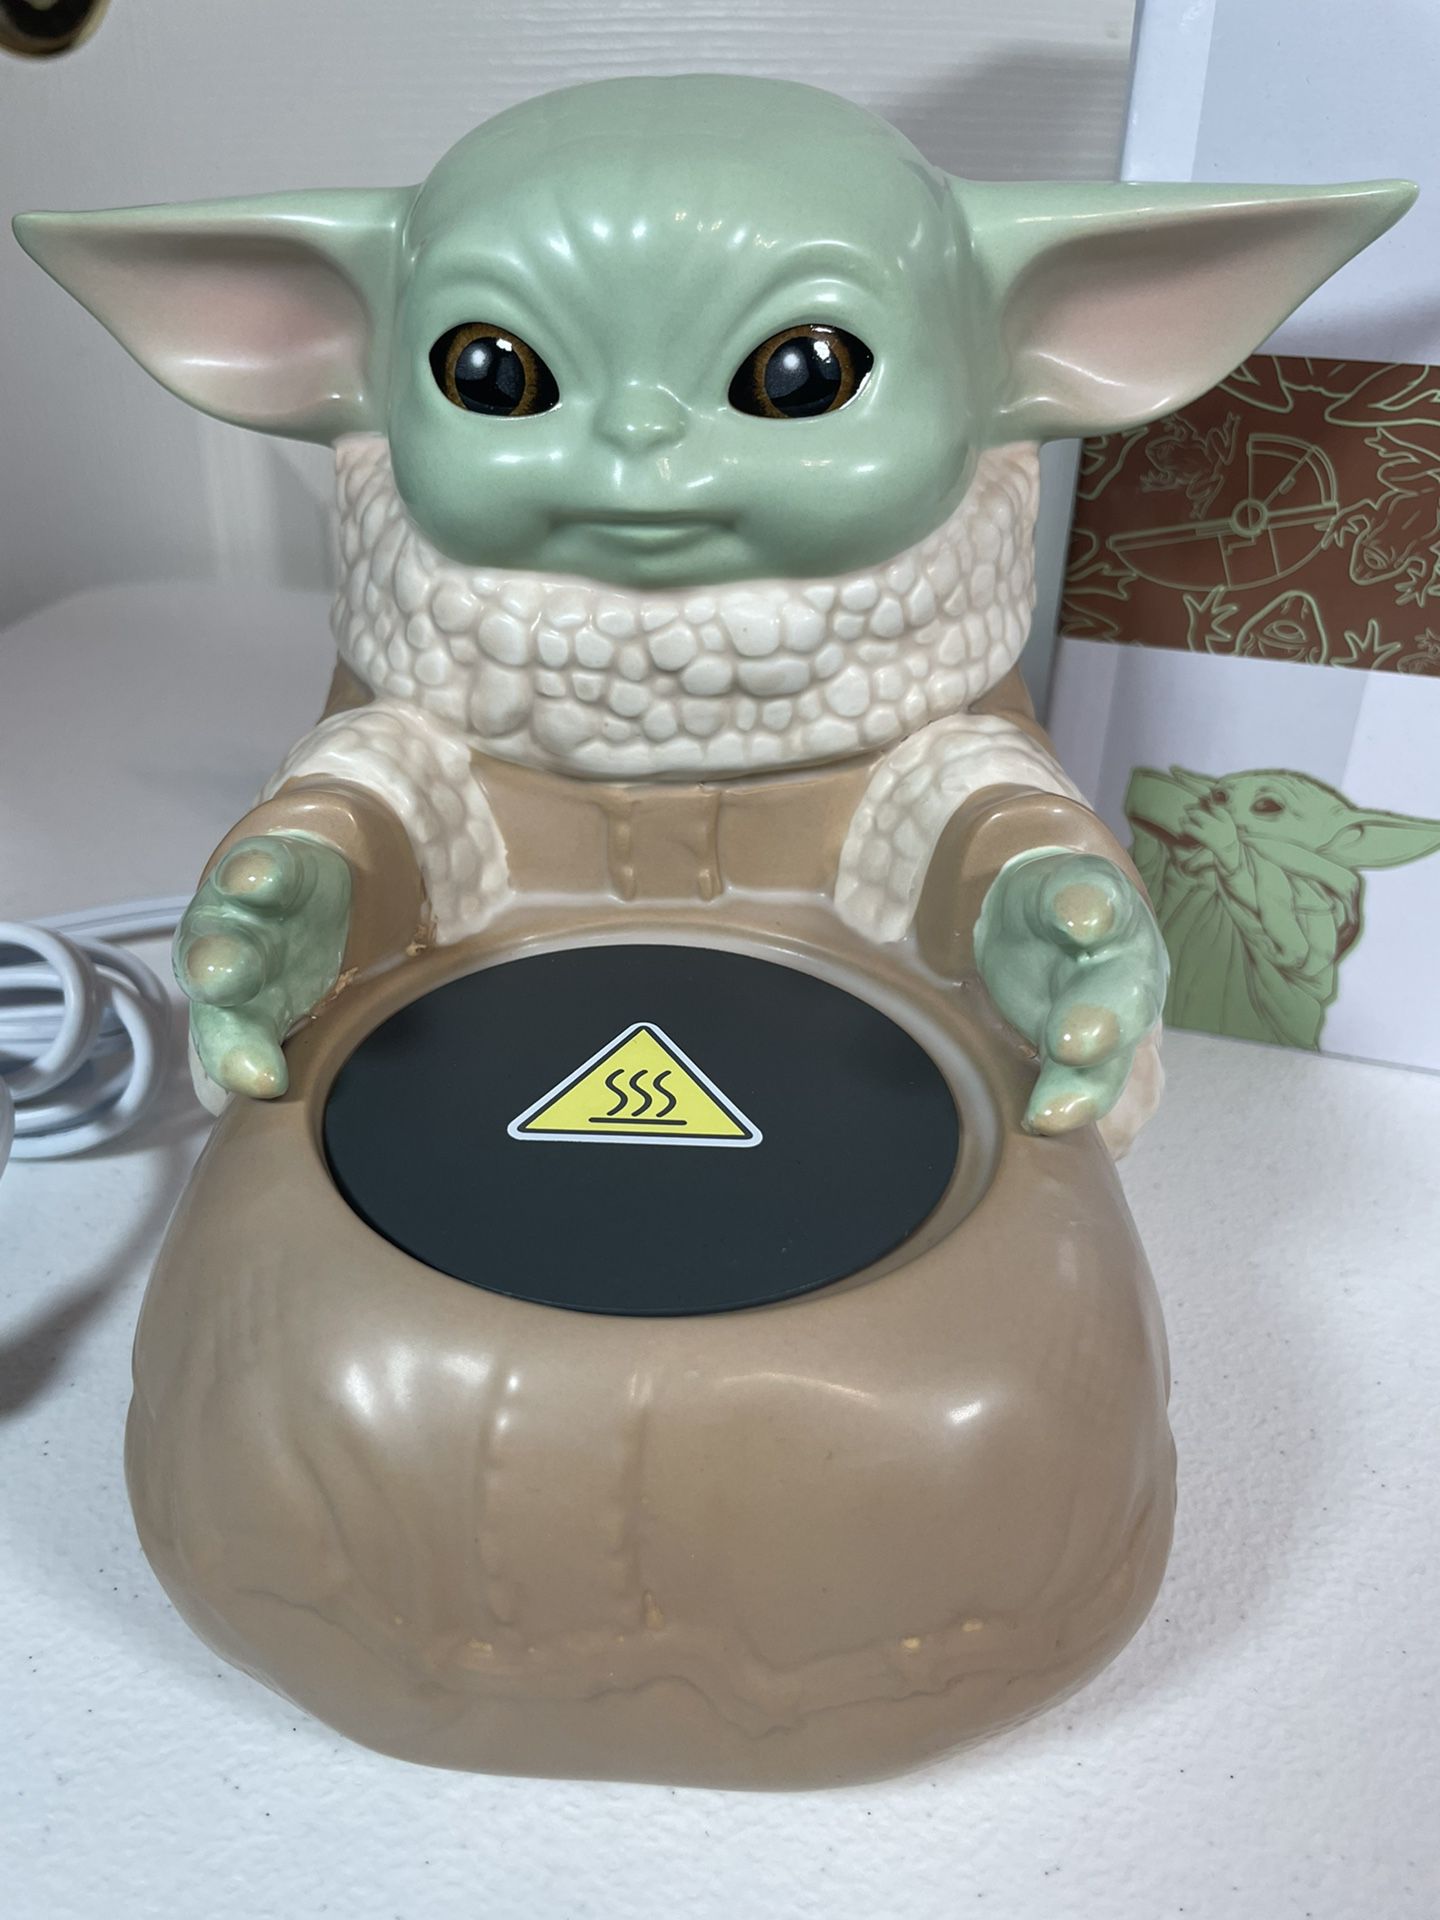 Scentsy “The Child” (Grogu) Wax Scent Warmer With Scentsy Bars